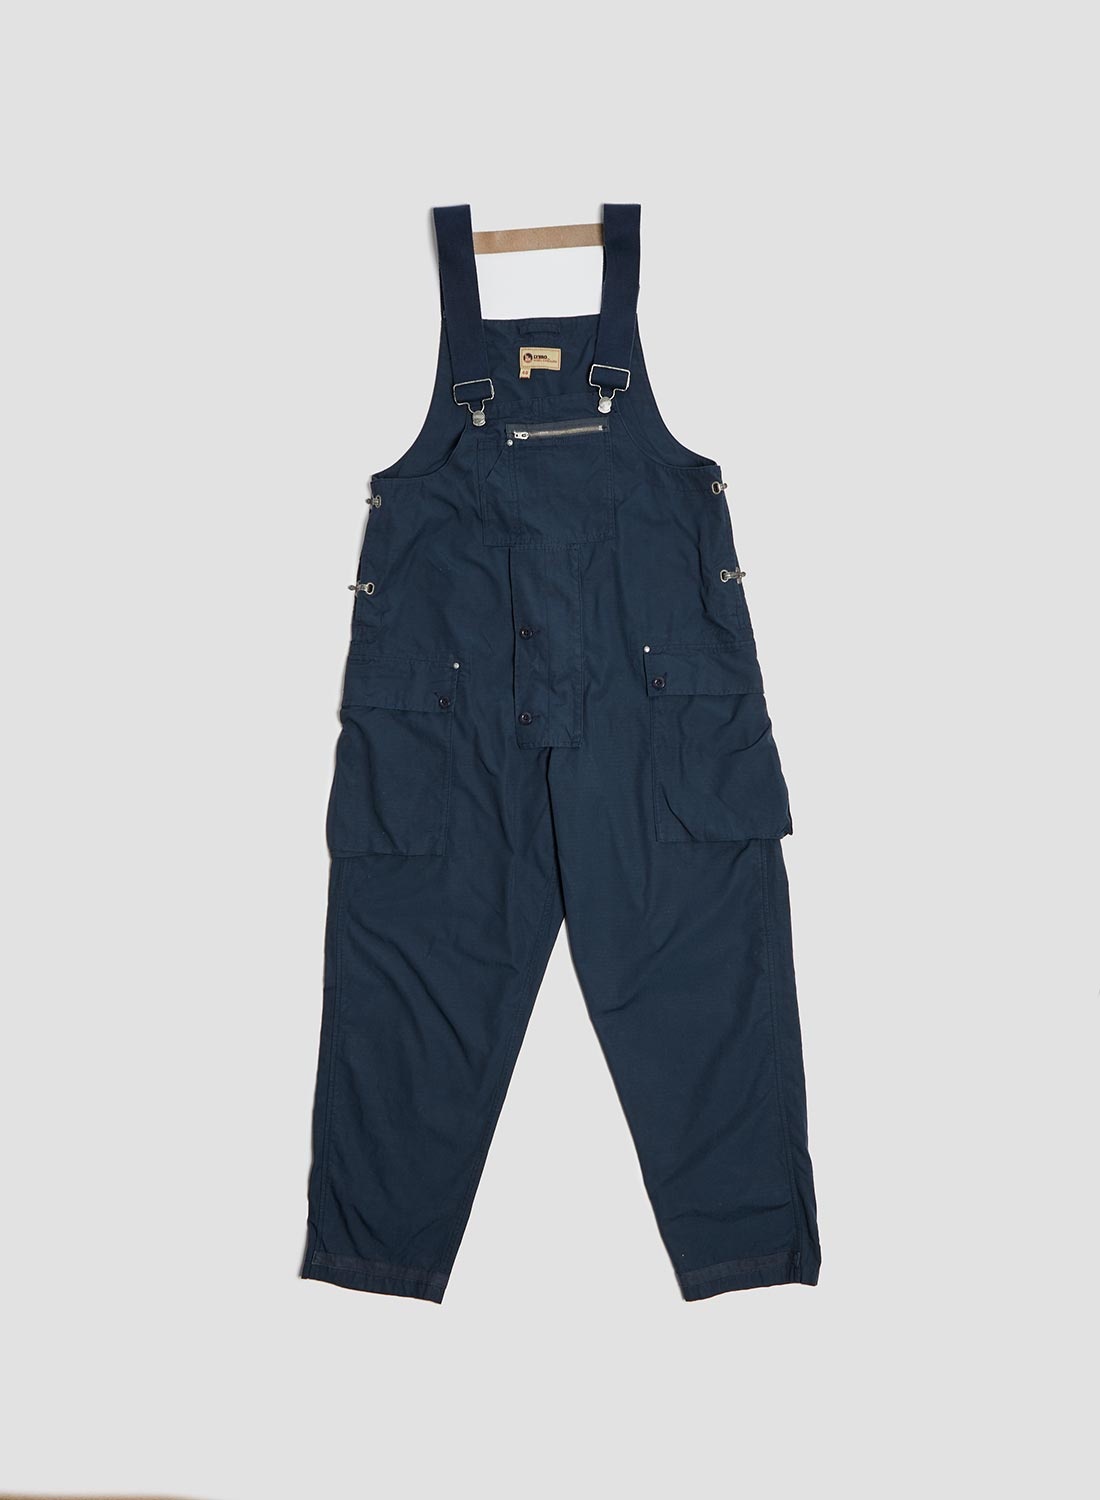 Naval Dungaree in Black Navy (Cotton Ripstop) - 1